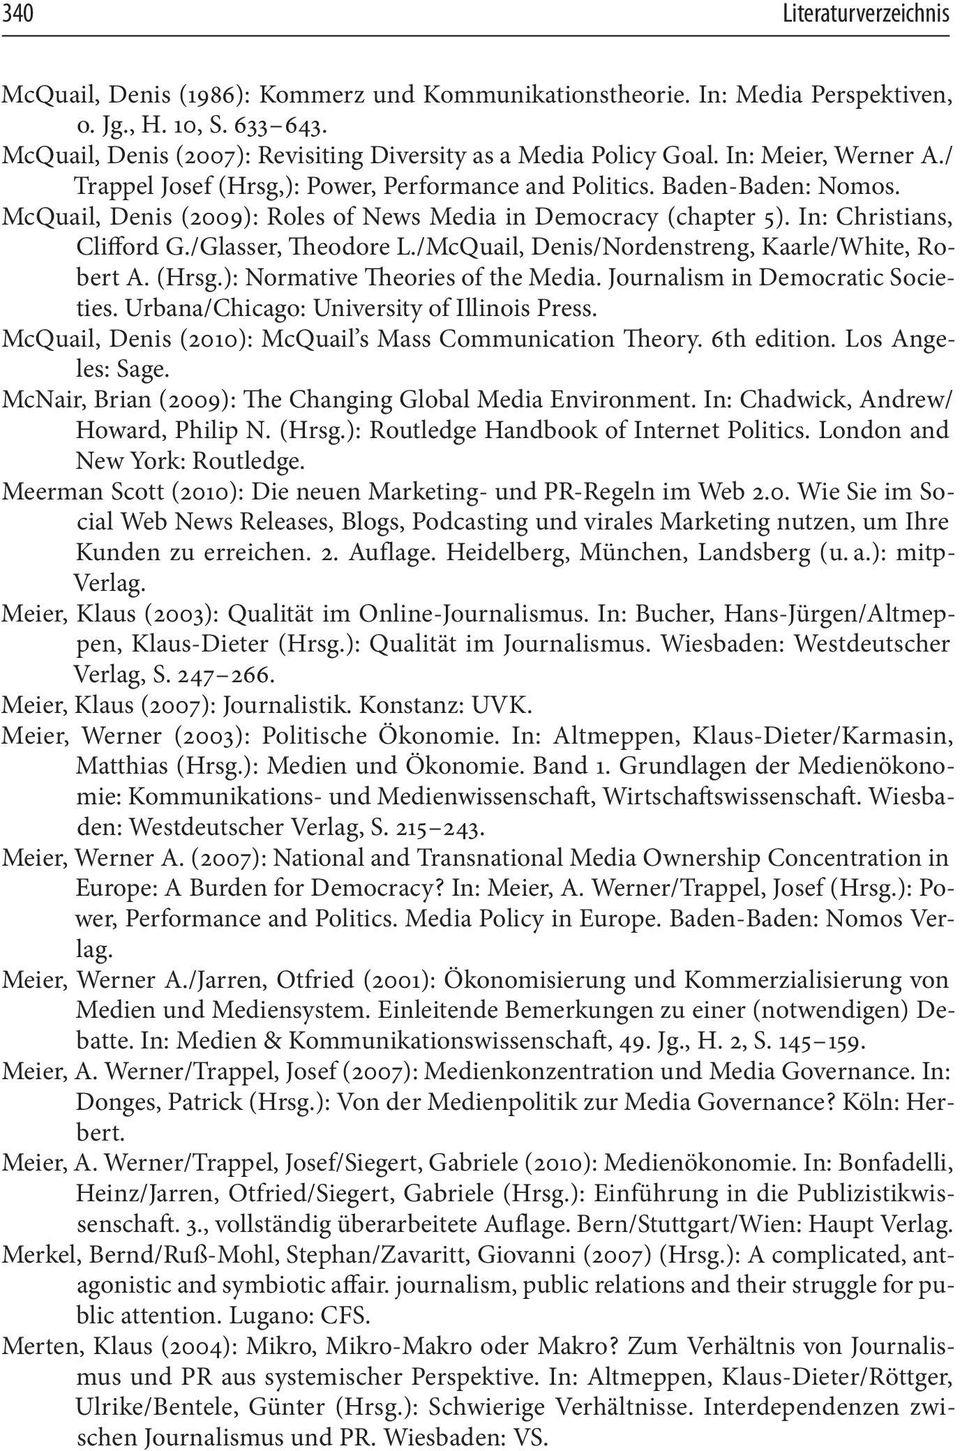 McQuail, Denis (2009): Roles of News Media in Democracy (chapter 5). In: Christians, Clifford G./Glasser, Theodore L./McQuail, Denis/Nordenstreng, Kaarle/White, Robert A. (Hrsg.